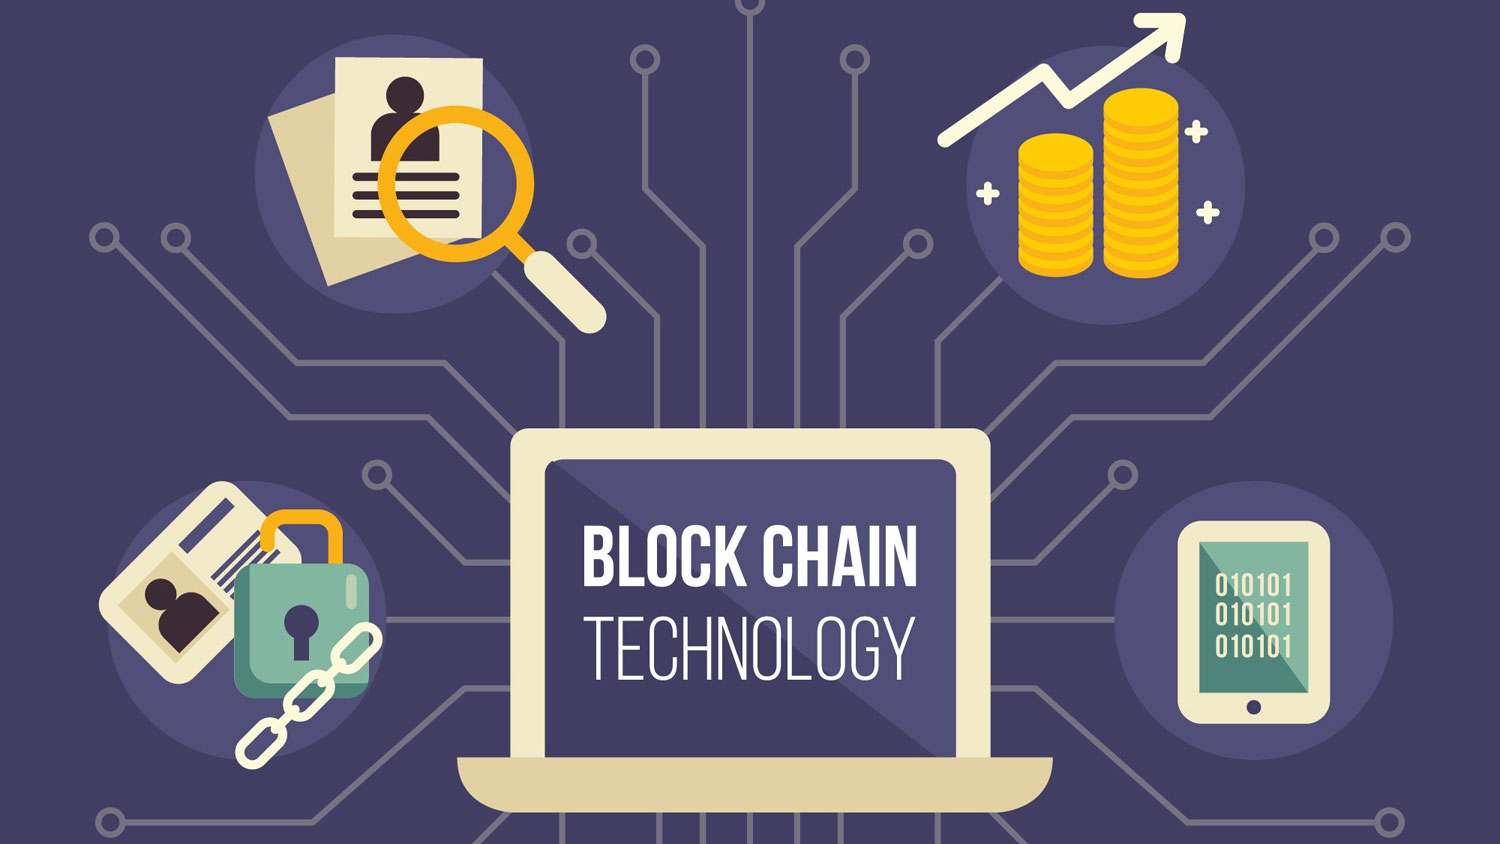 Take the first step towards a rewarding future in Blockchain Technology. Enroll Our Blockchain Online Course!